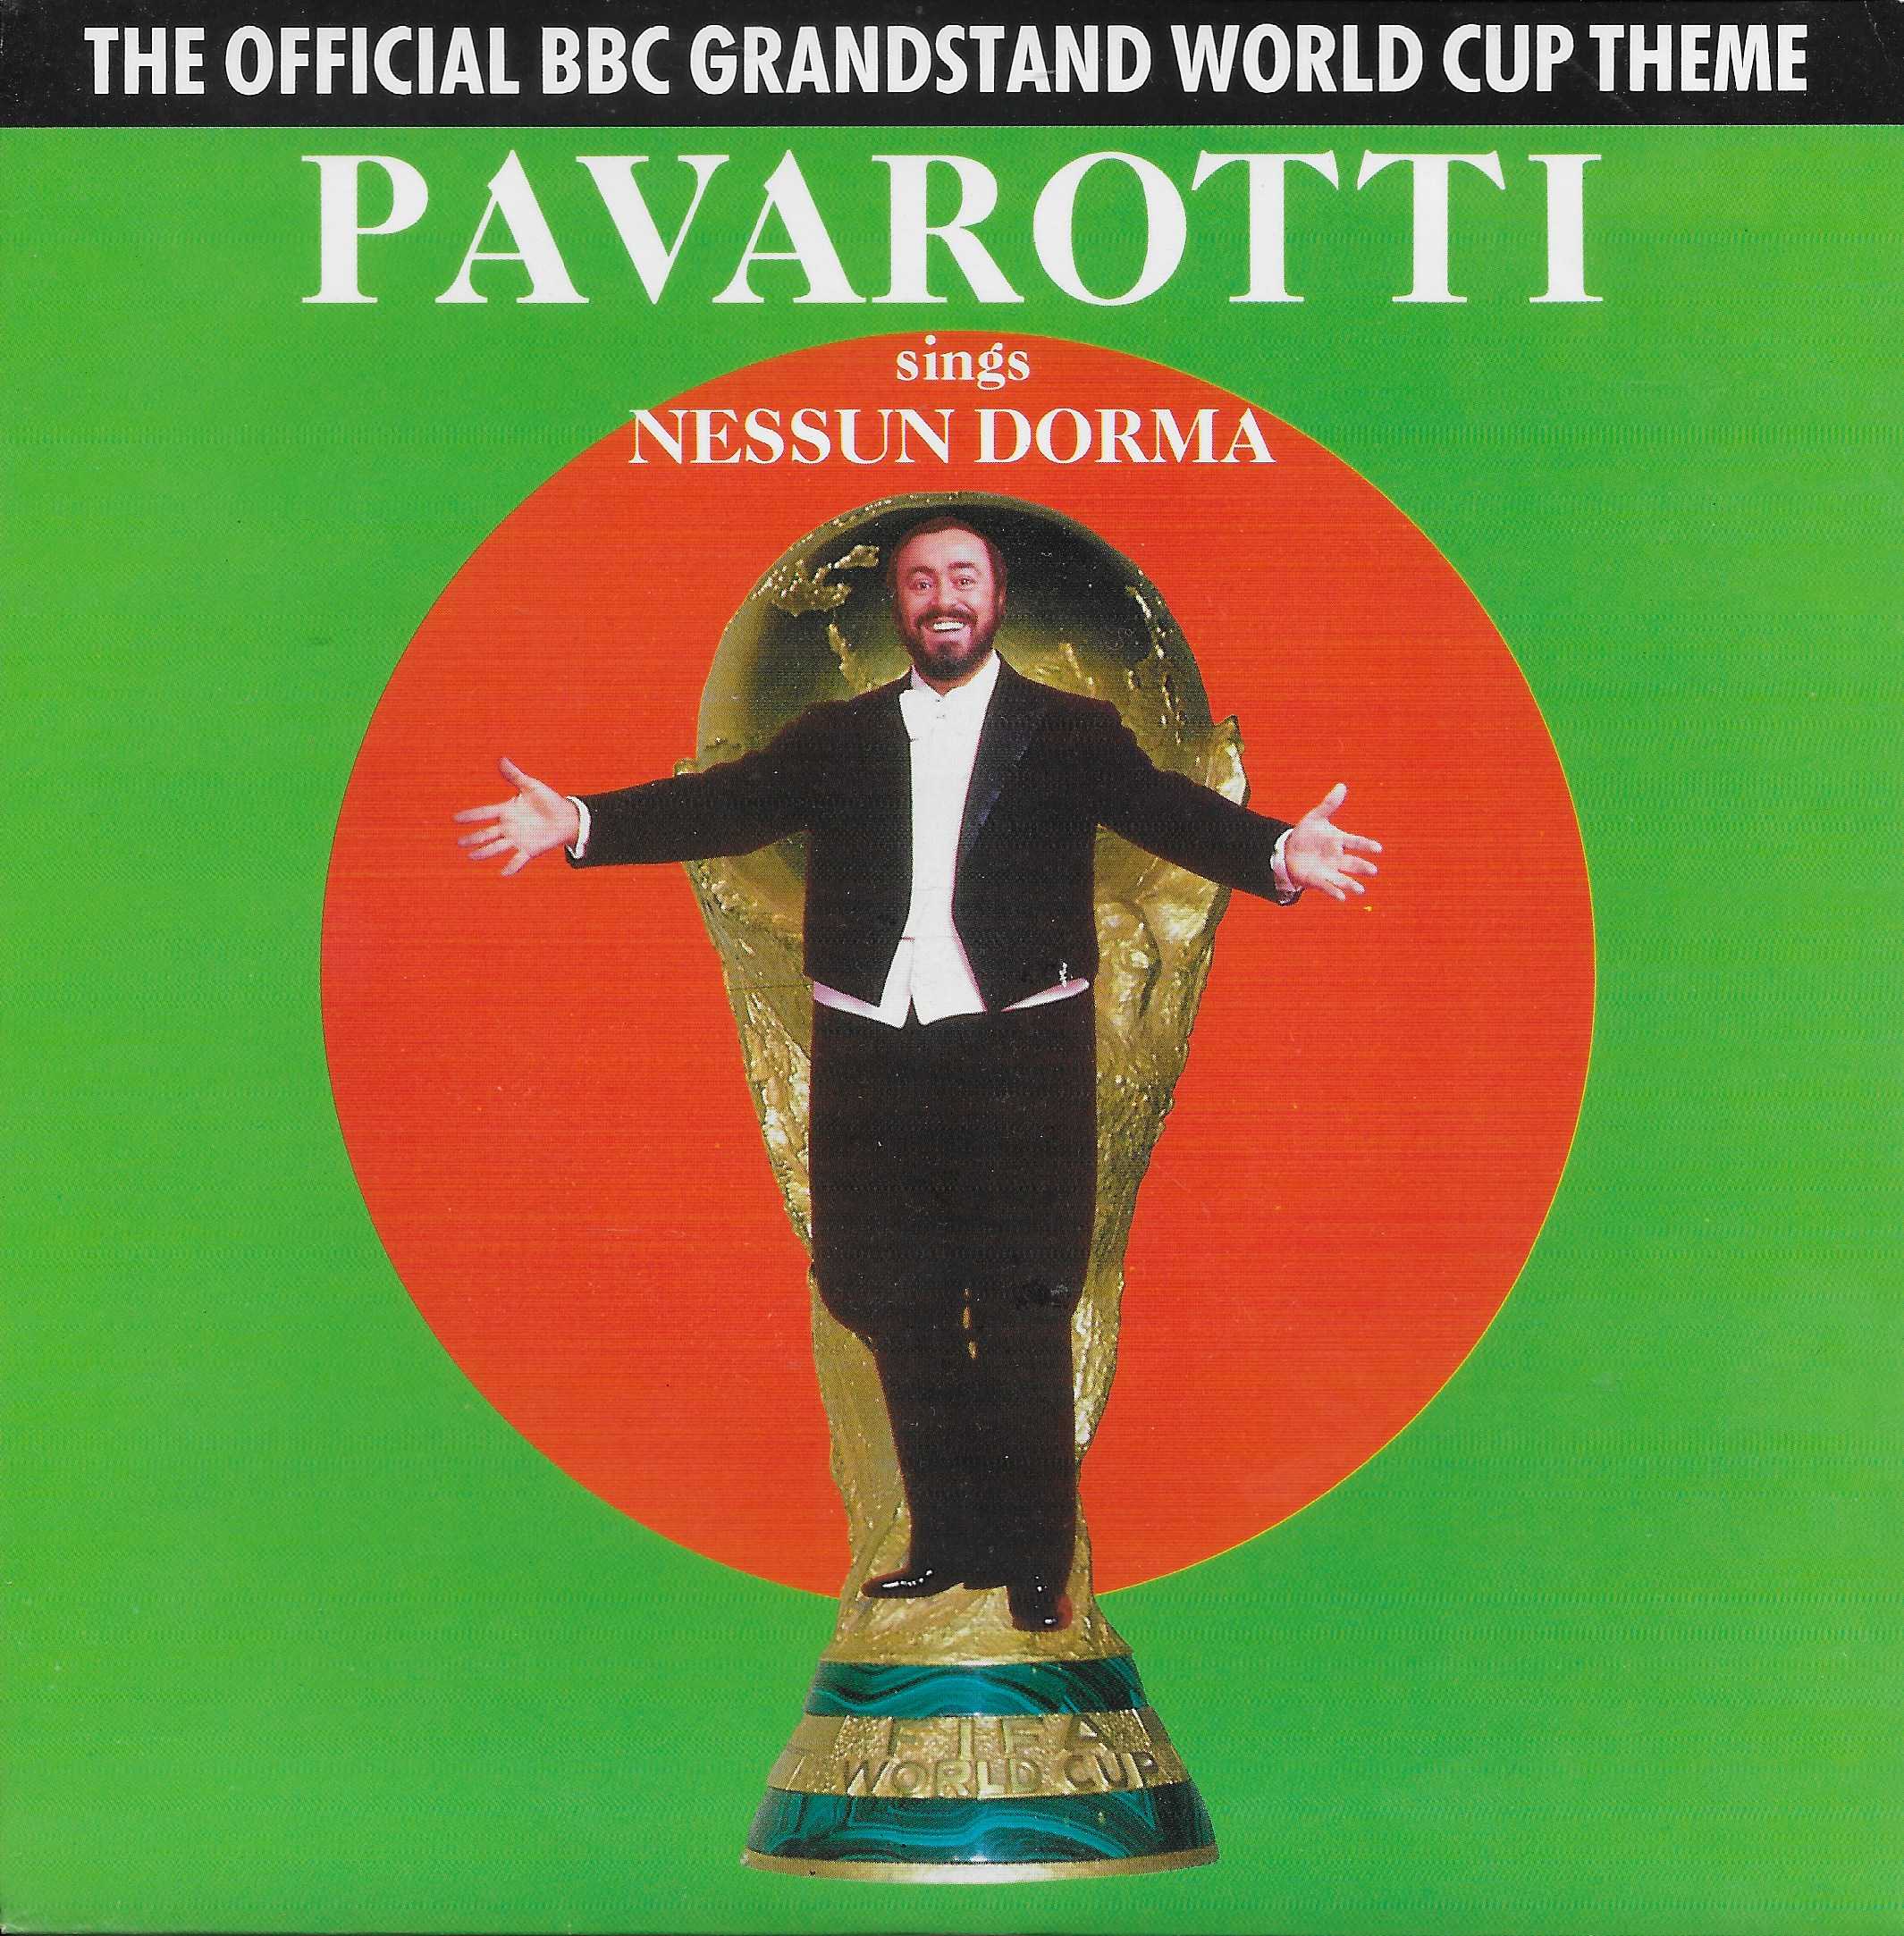 Picture of PAVO 3 Nessun dorma (World Cup Grandstand (1990)) by artist Puccini / Teschemacher / Di Capua / Pavarotti from the BBC records and Tapes library